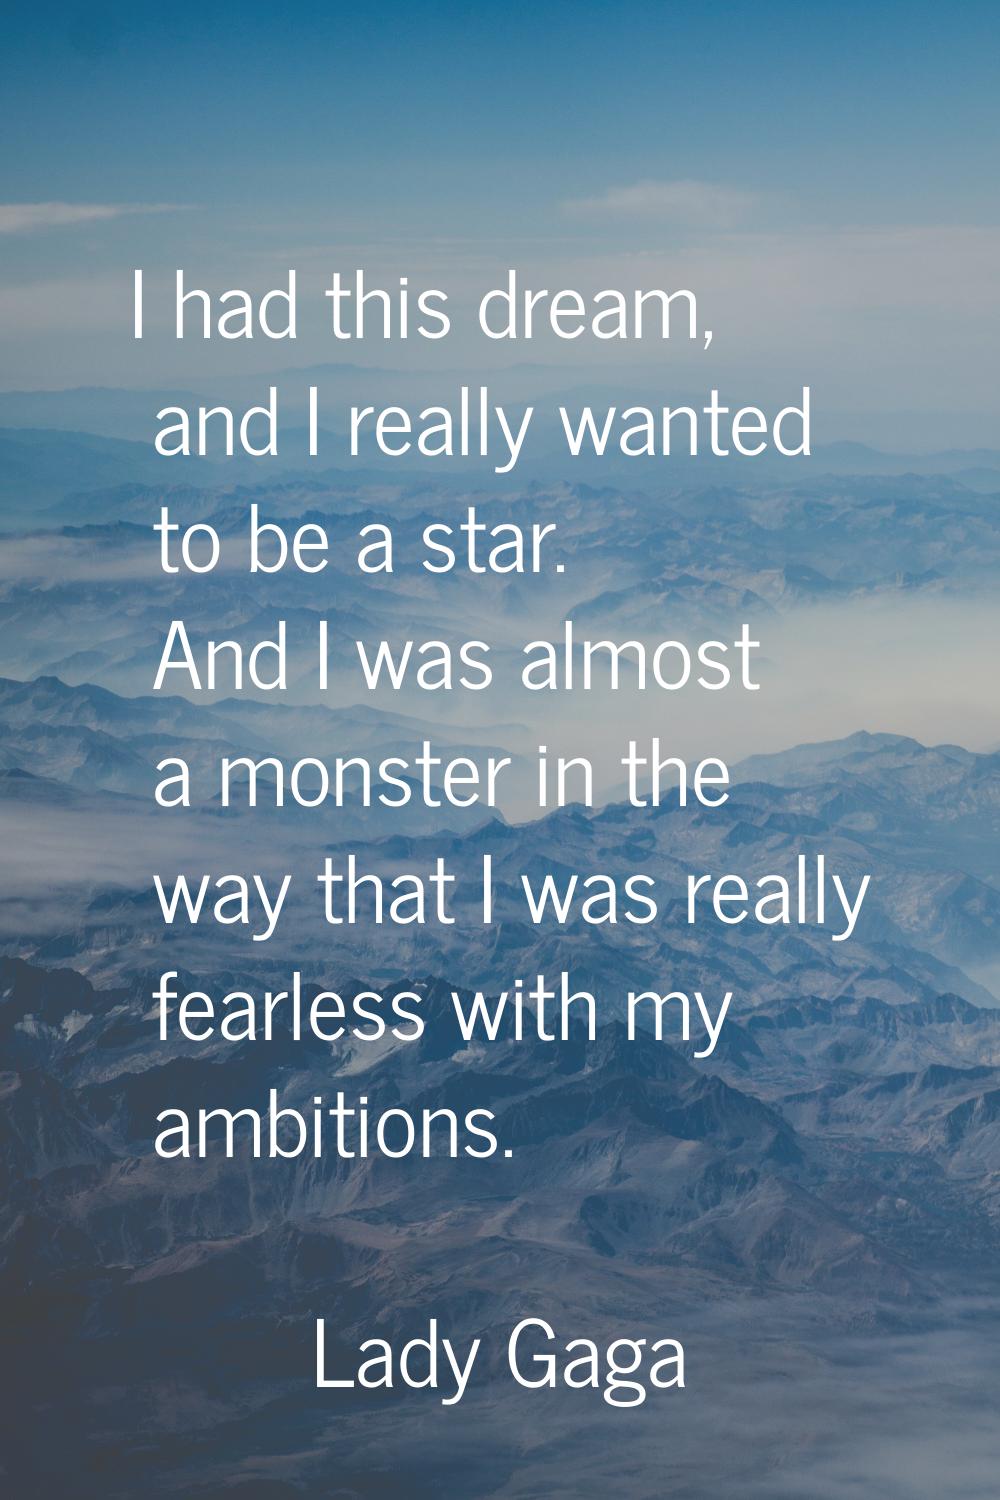 I had this dream, and I really wanted to be a star. And I was almost a monster in the way that I wa